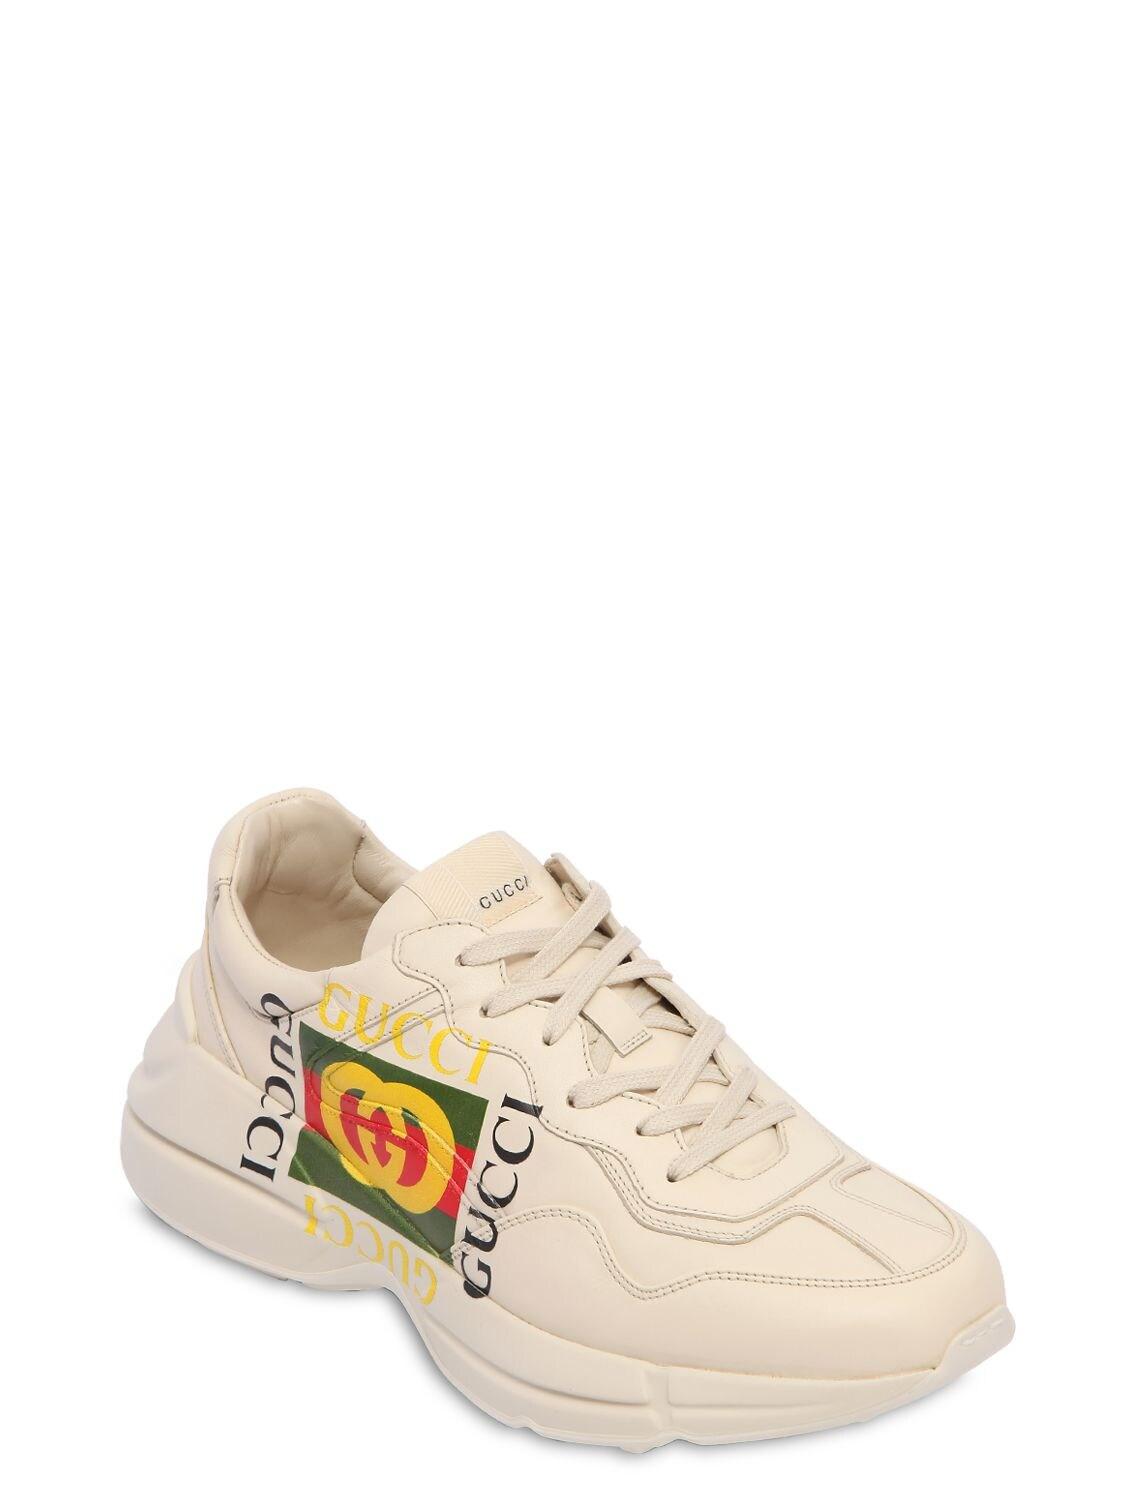 Gucci Rhyton Logo Leather Sneaker in Ivory (White) for Men - Save 8% - Lyst